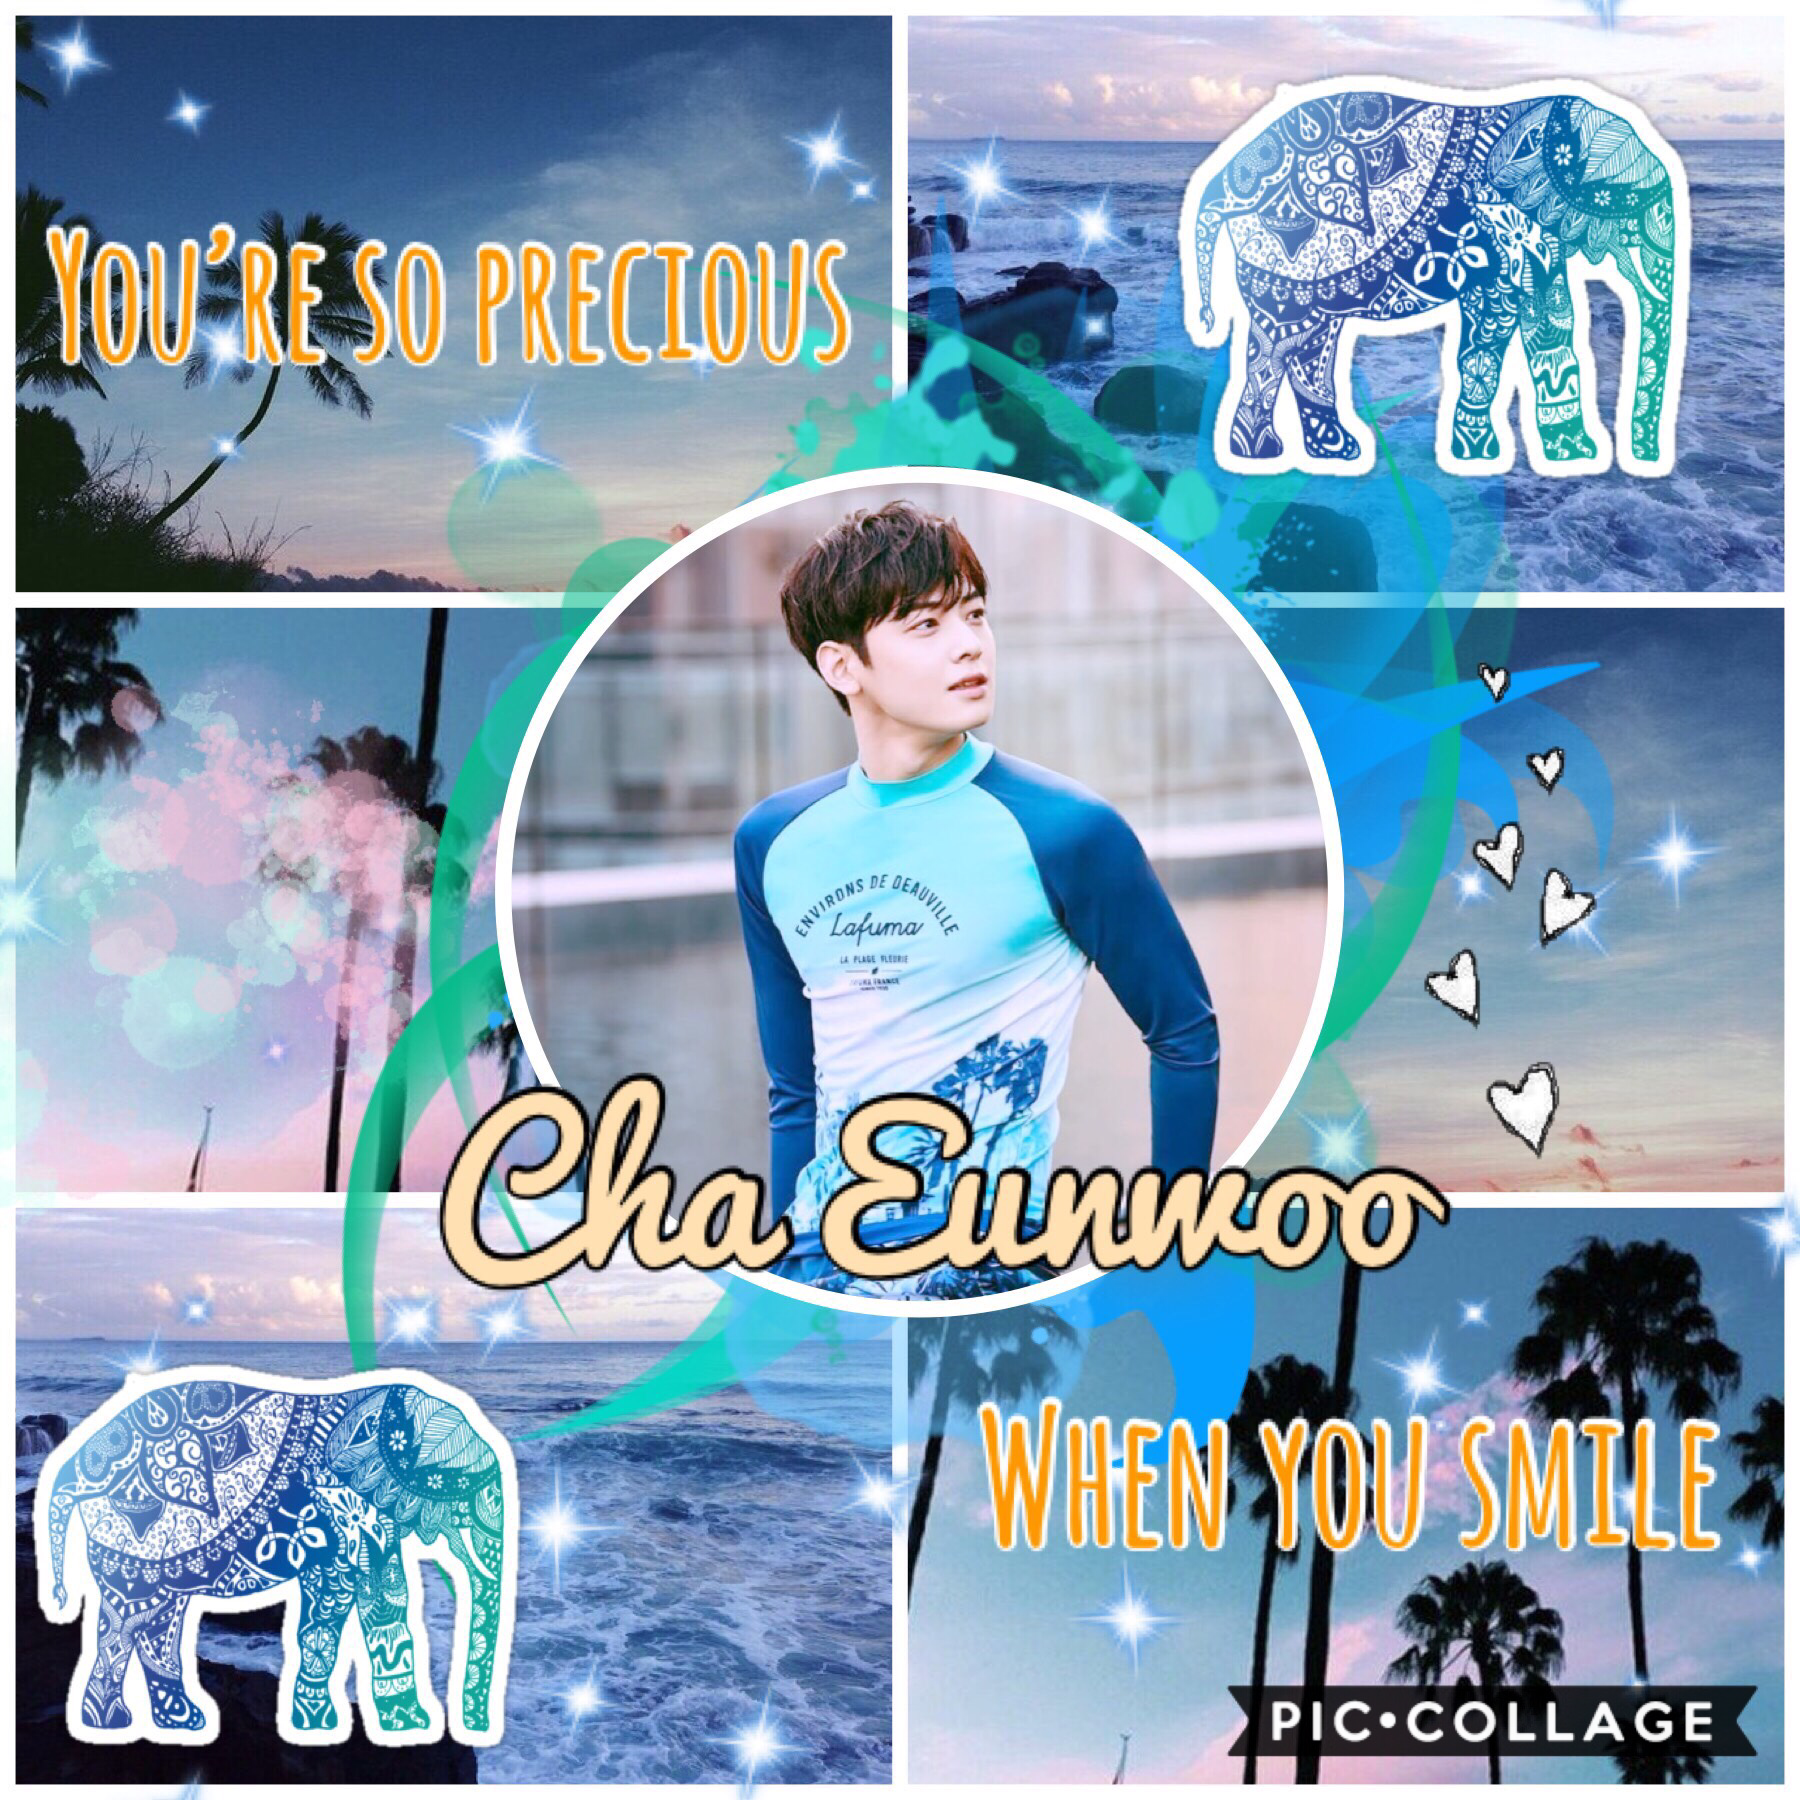 •Whoop Whoop•
🍃Eunwoo~Astro🍃
Edit for @BeuTeaFul! I hope you like it sista💓

Cha Eunwoo is the best looking human being out there don’t @me bc I’ll fight:)😘
His smile also makes me feel super happy😁